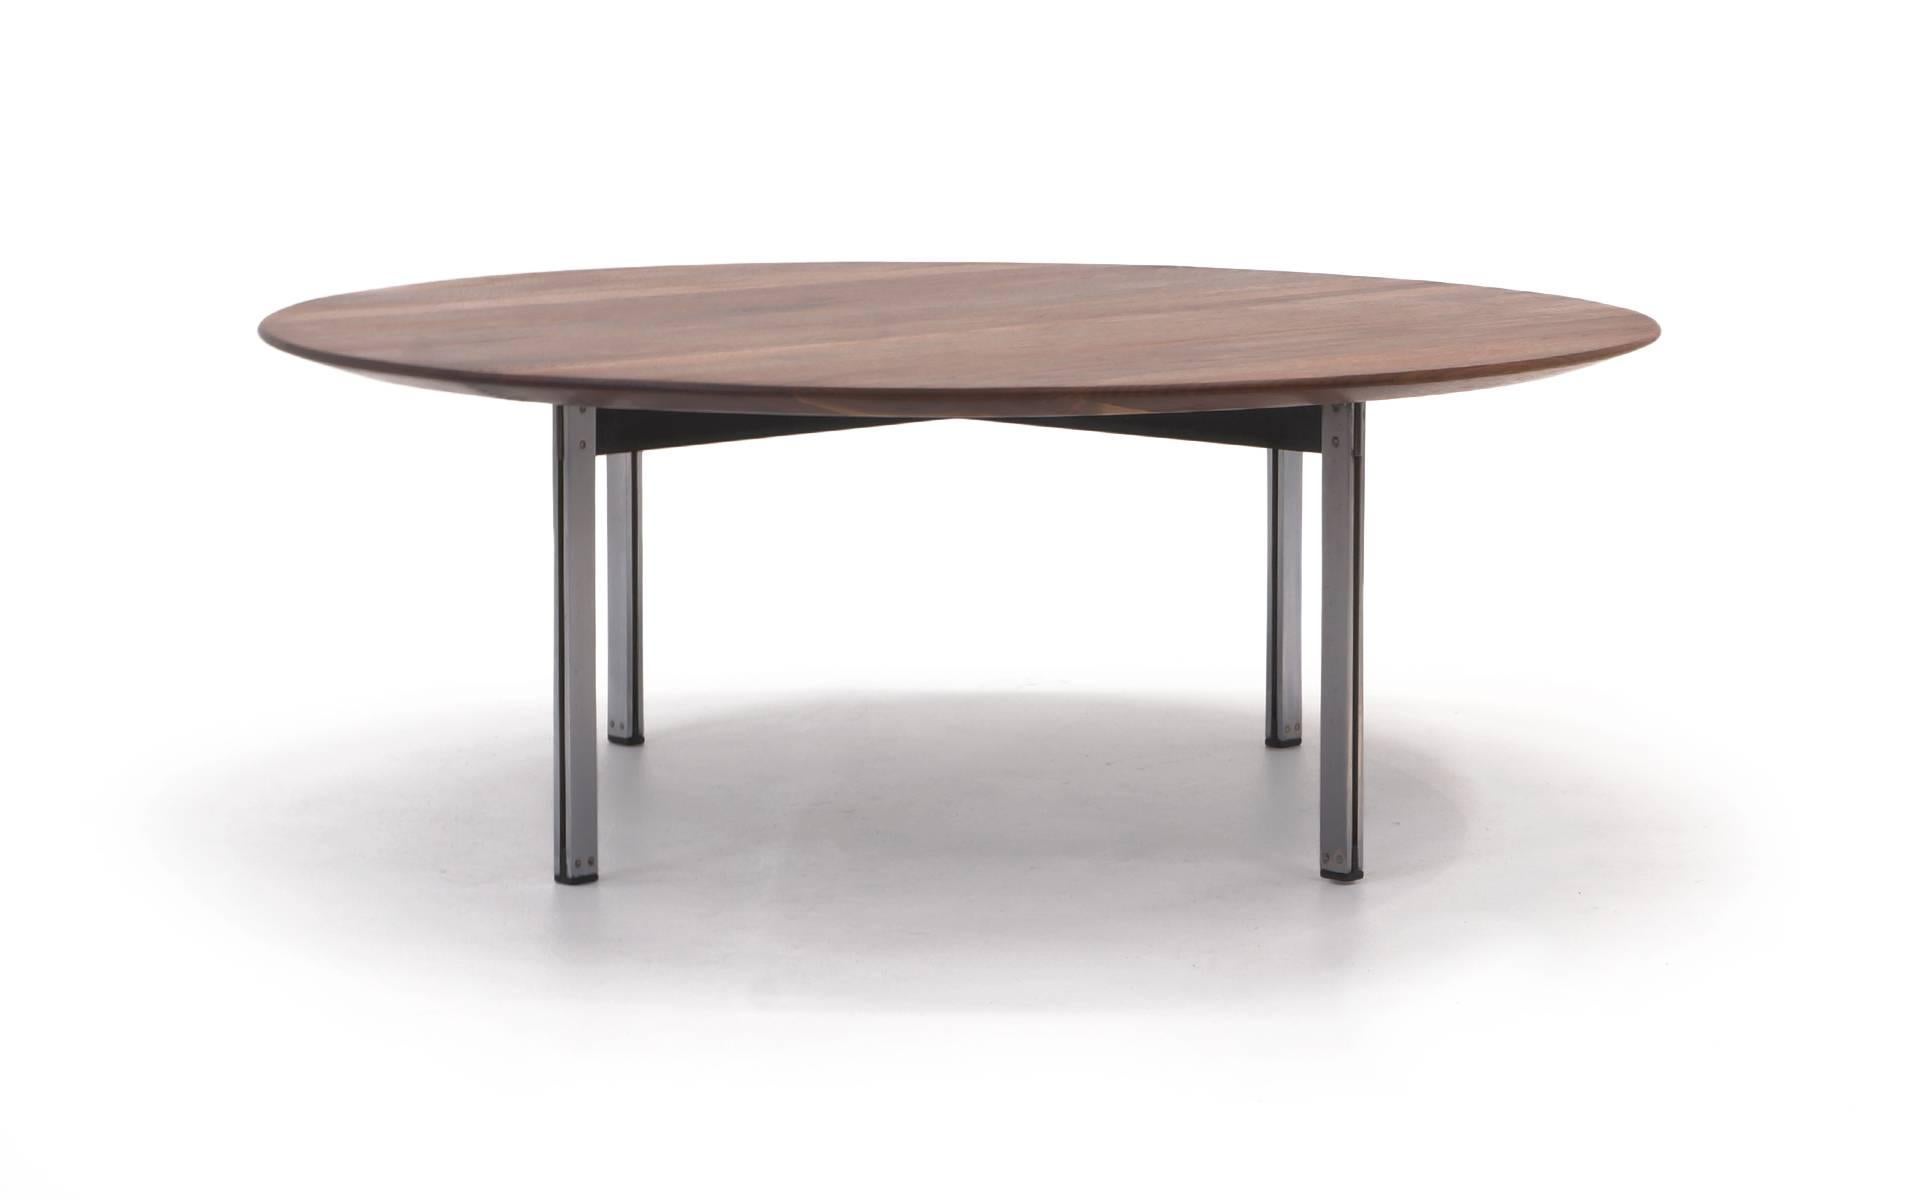 Solid walnut Florence Knoll coffee or cocktail table with chromed steel legs from the ParallelB series. The top has that beautiful Knoll beveled edge on the underside that gives it a light look while being a full one inch think top. Expertly